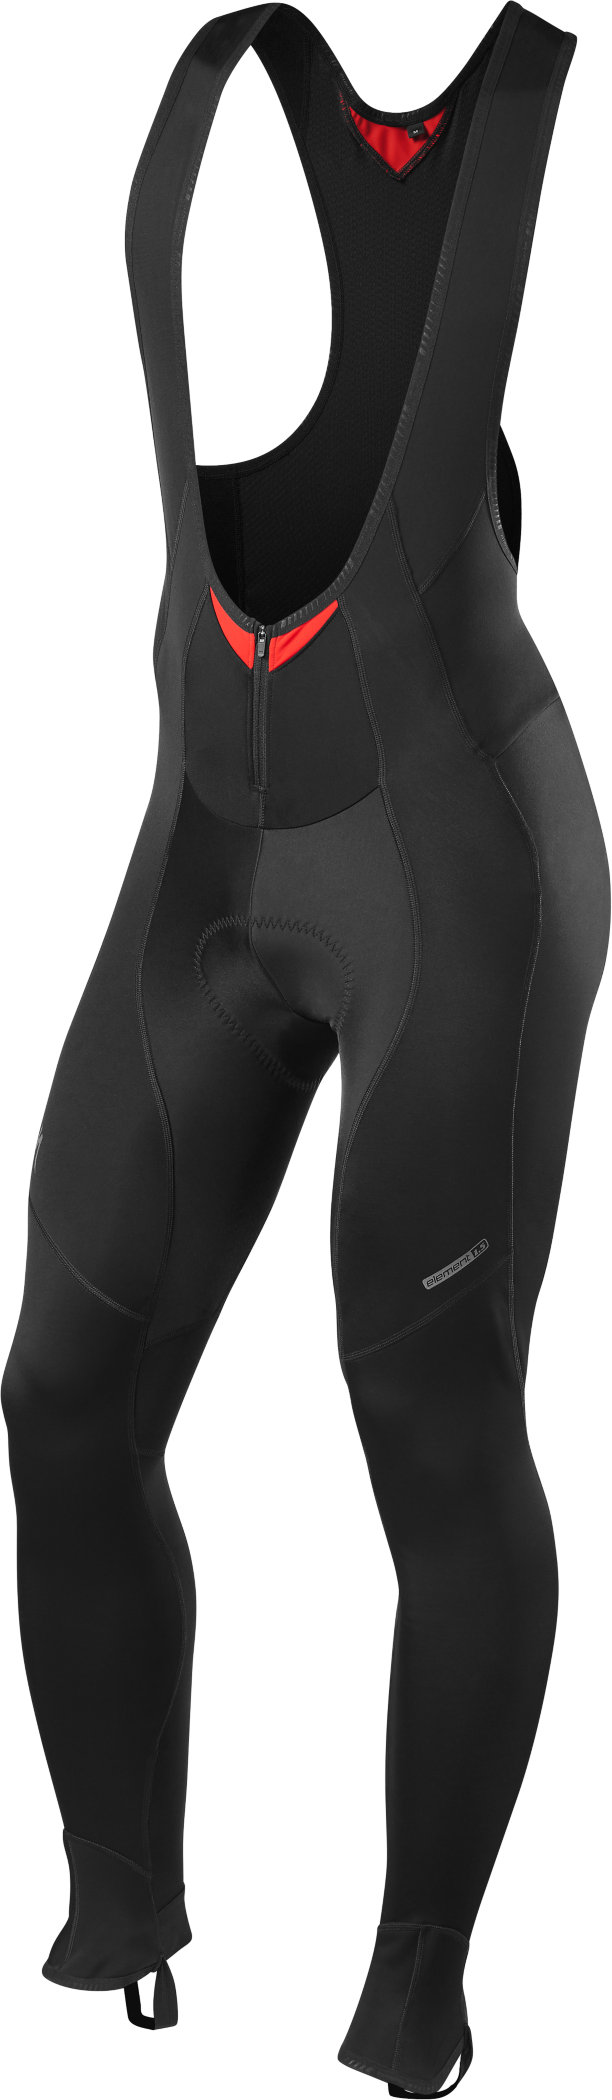 specialized element cycling bib tights